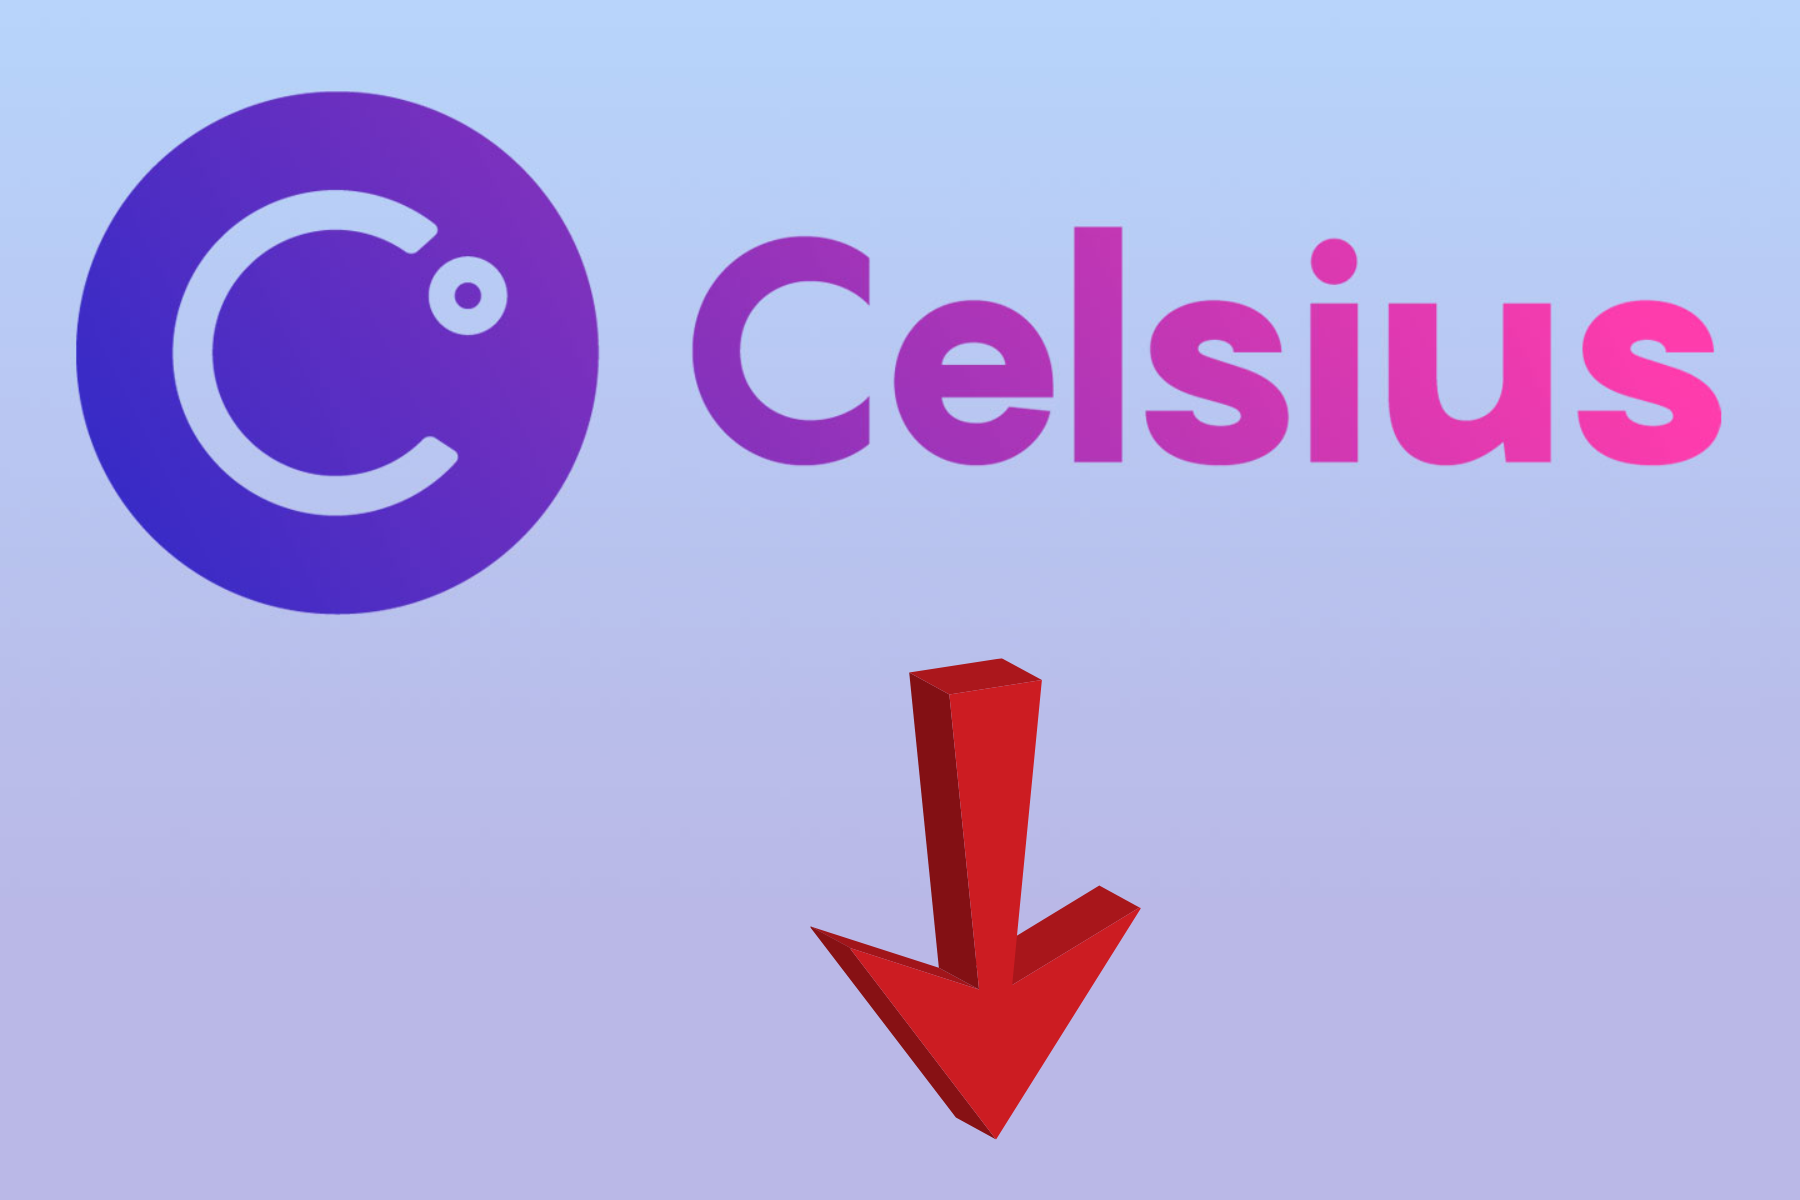 Celcius' logo features a red arrow pointing downward, indicating that Celcius is falling